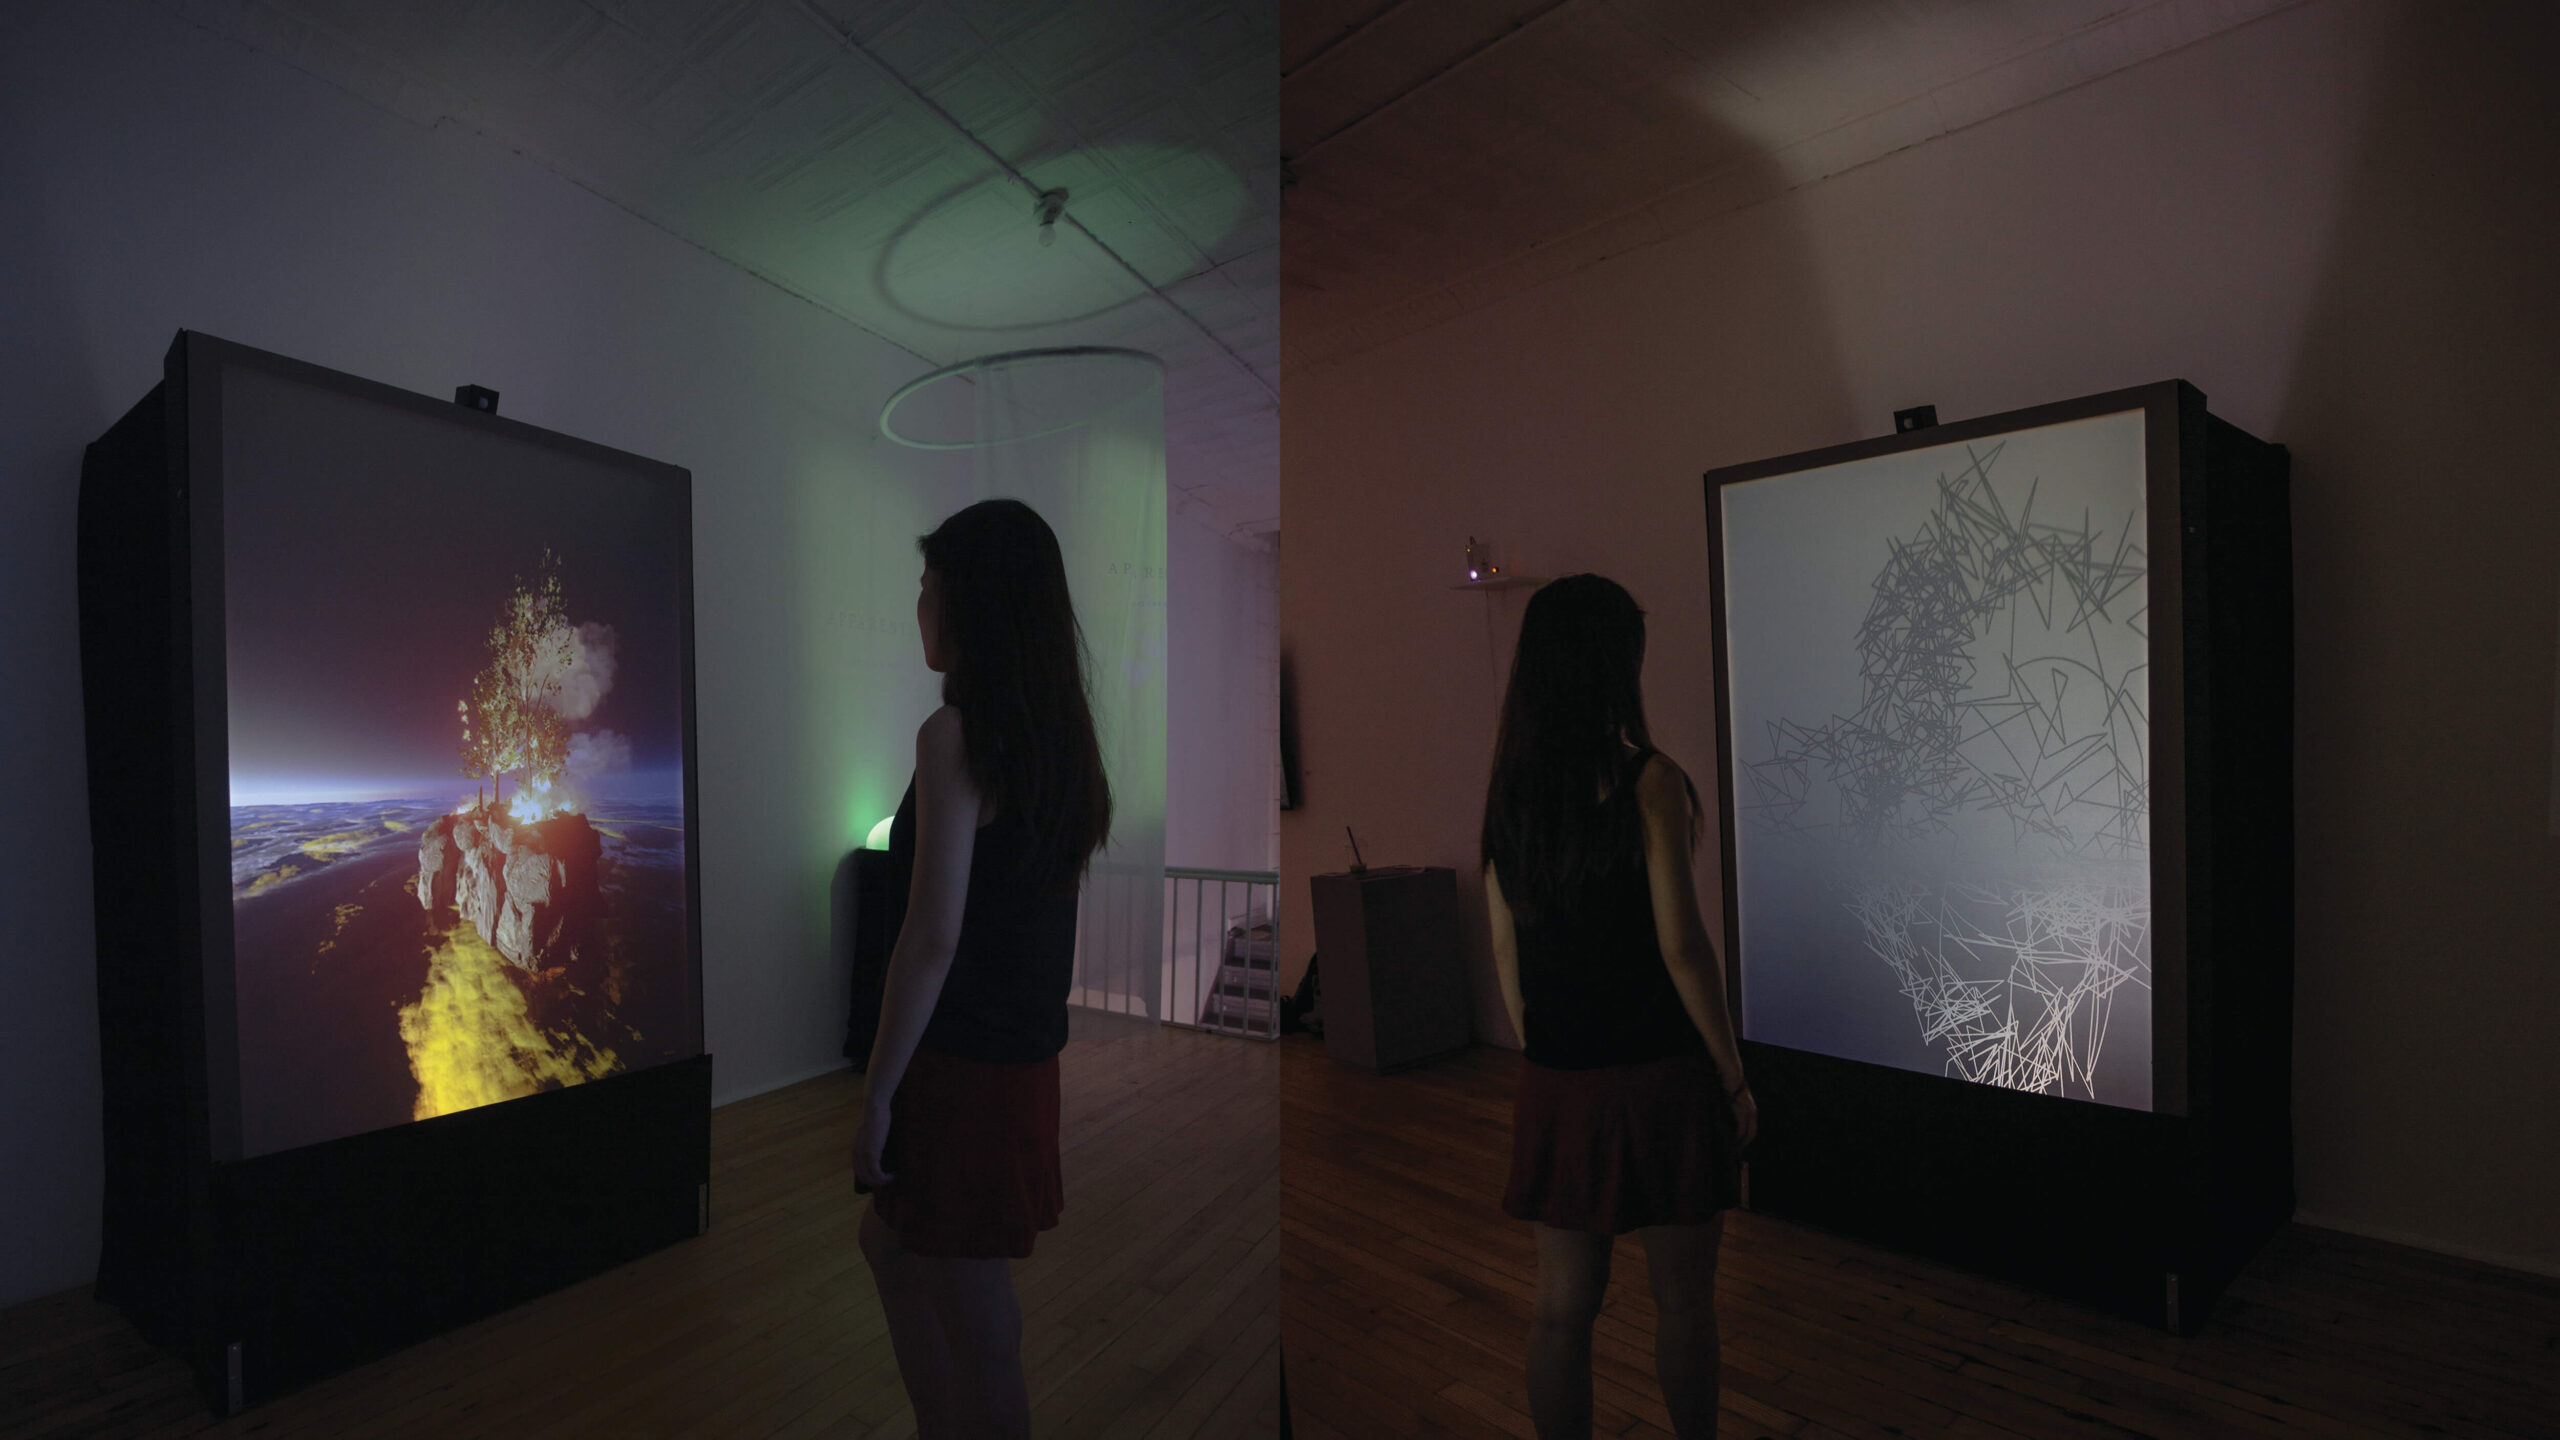 Two images of a woman standing in front of an interactive art installation consisting of a large rectangular box with a screen in front of it.